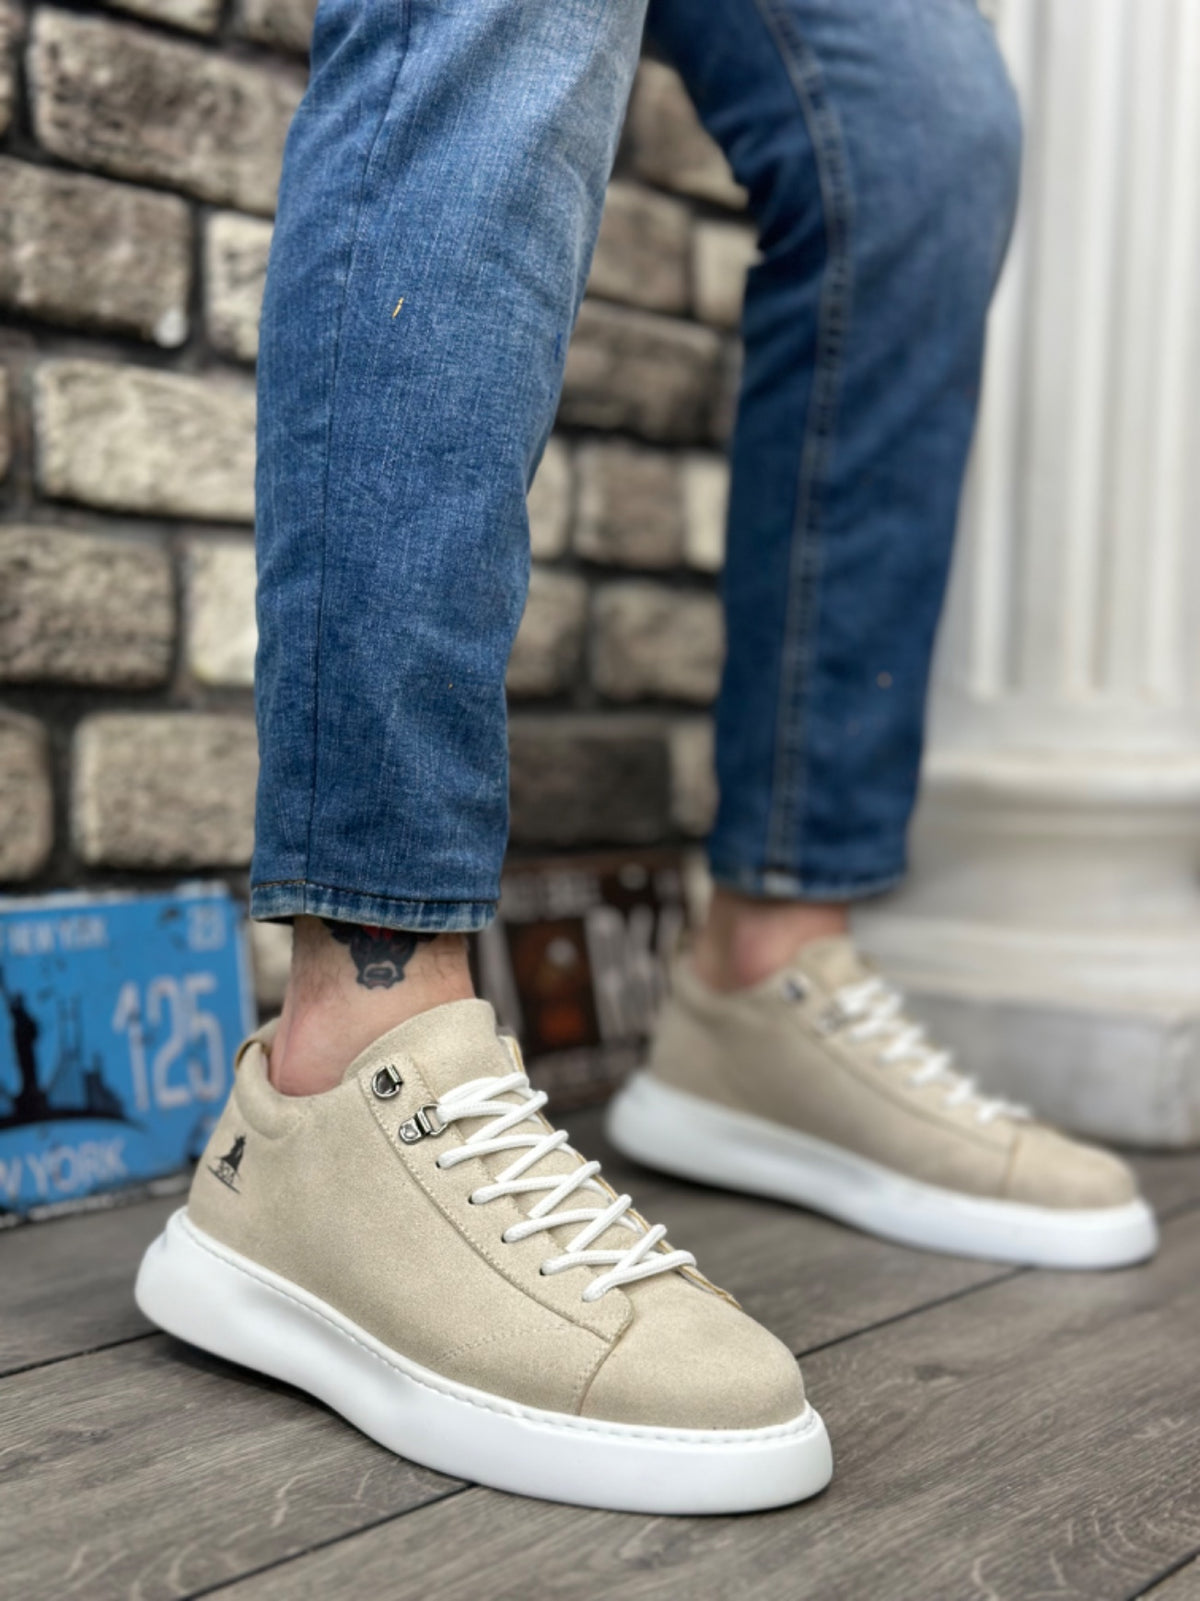 BA0331 Lace-Up Men's High Sole Cream Suede White Sole Sports Shoes - STREETMODE™